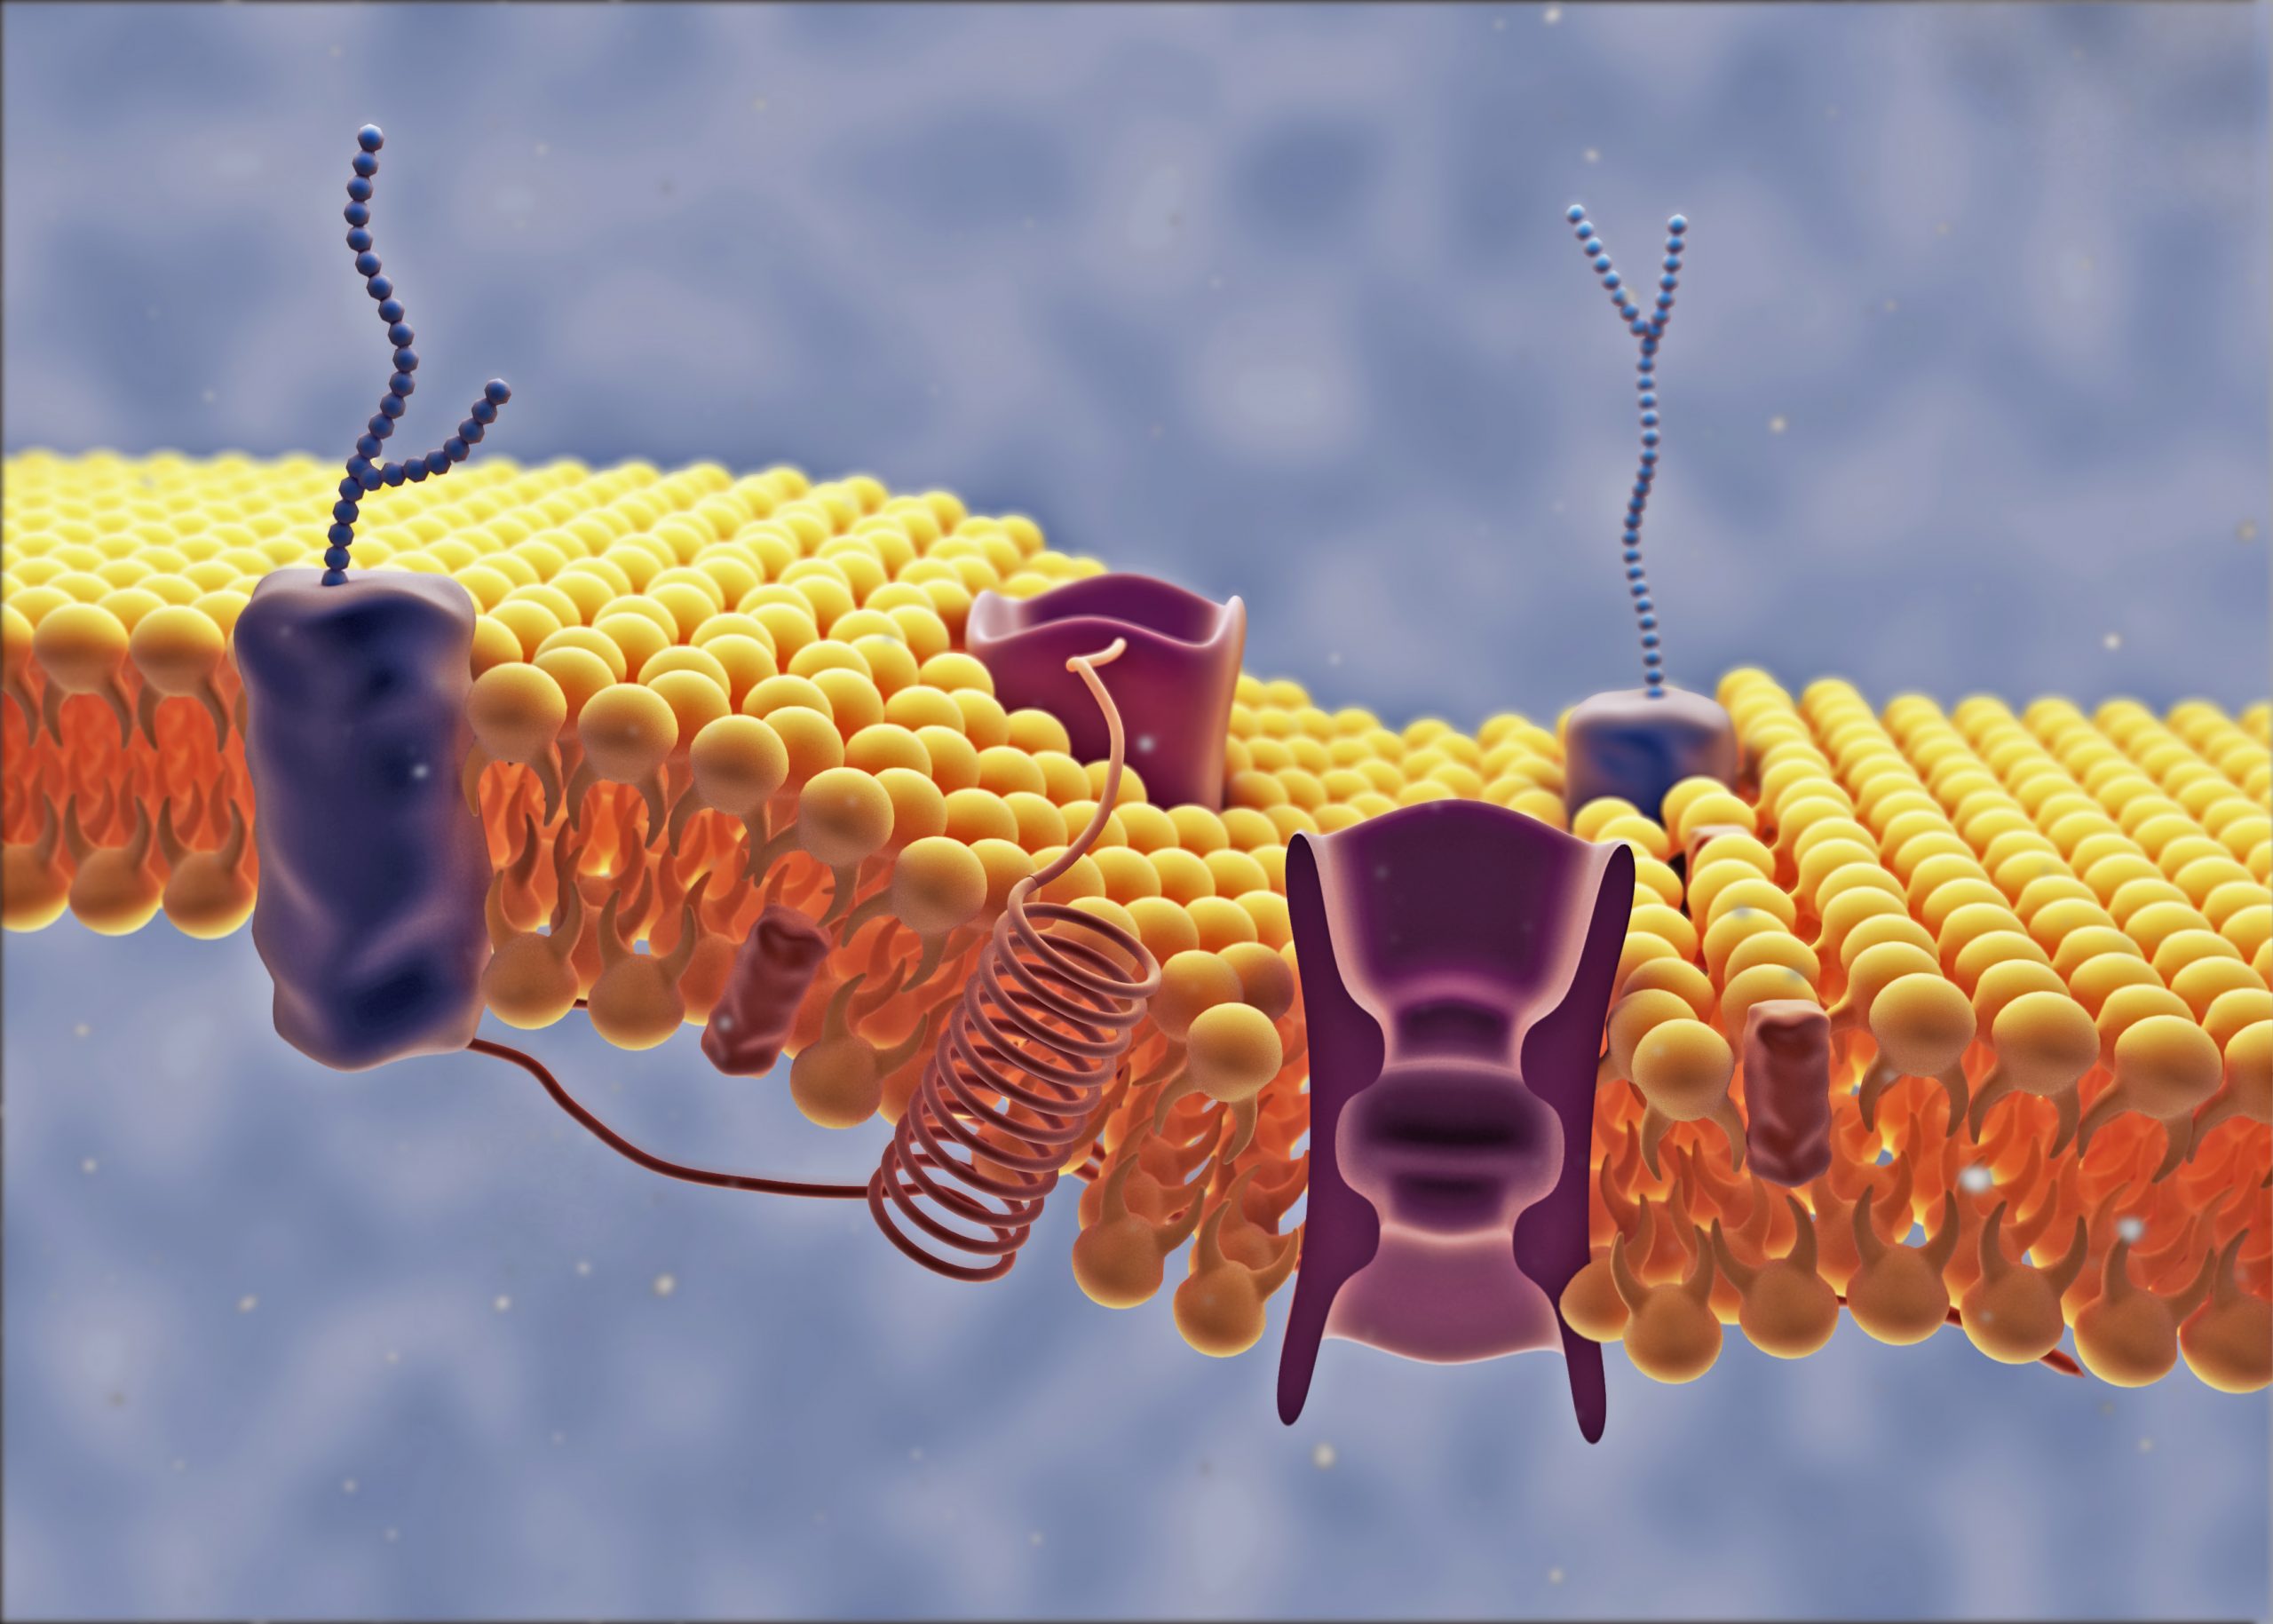 computer model of a cell membrane lipid bilayer with receptors, proteins and carbohydrates